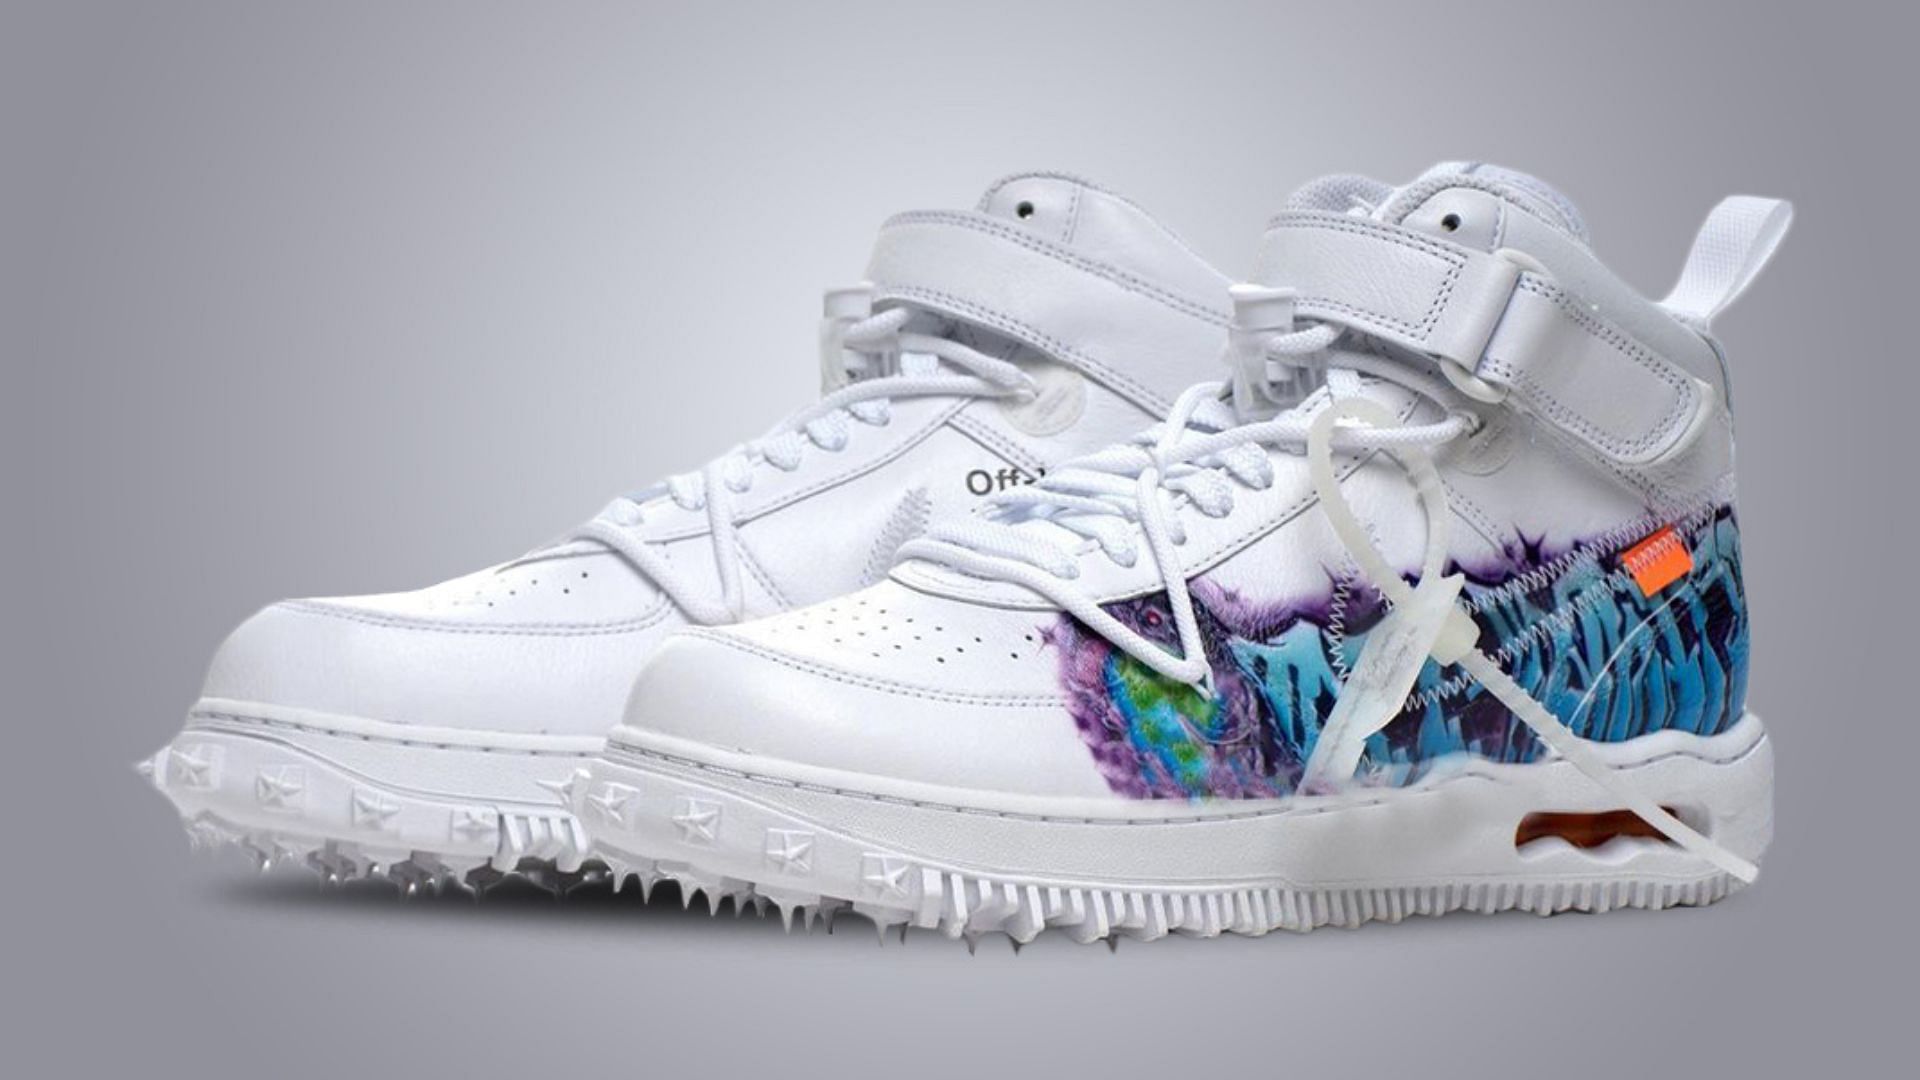 Where airforce mid to buy Off-White x Nike Air Force 1 Mid “Graffiti” shoes